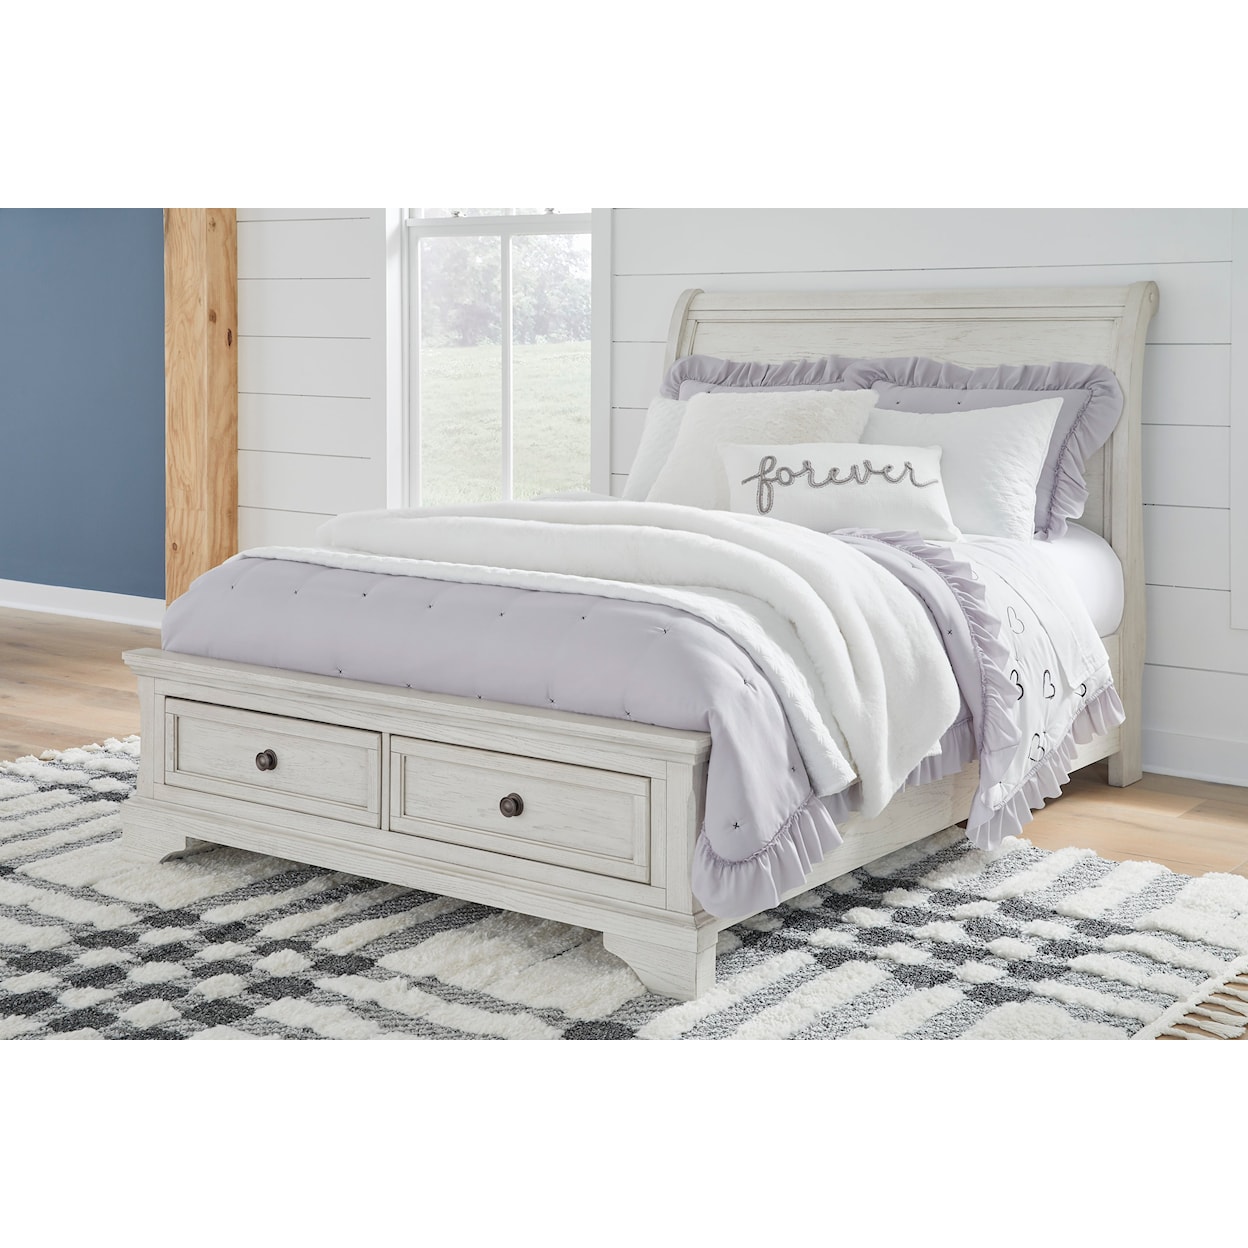 Benchcraft Robbinsdale Full Sleigh Bed with Storage